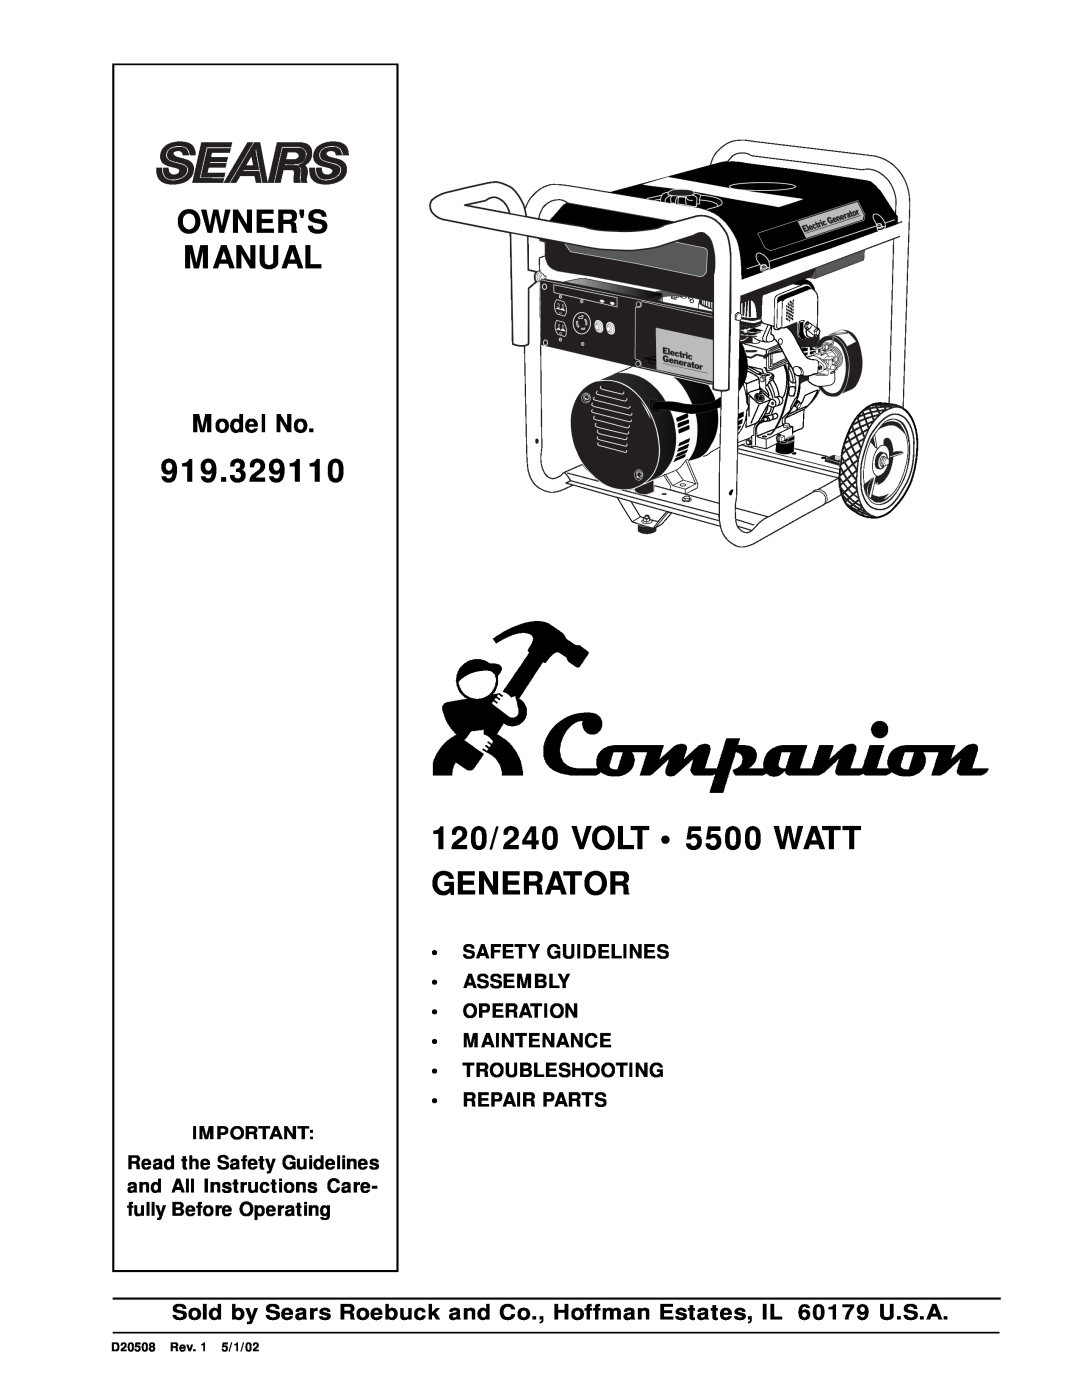 Sears 919.329110, D20508 owner manual 120/240 VOLT • 5500 WATT GENERATOR, Model No, Safety Guidelines Assembly Operation 